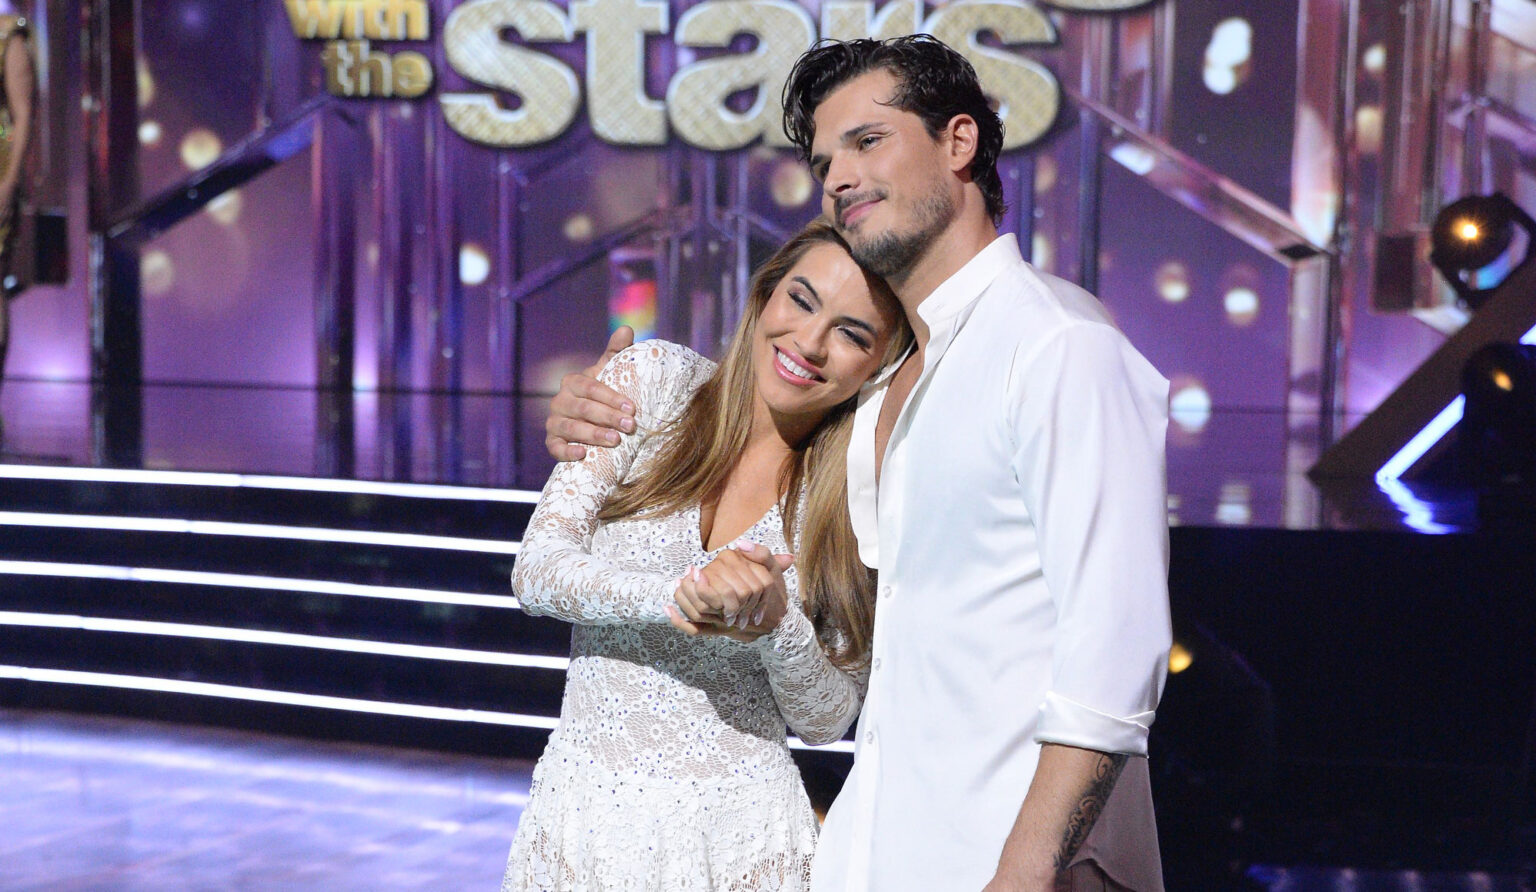 Chrishell Stause's 'DWTS' partner Gleb Savchenko is getting divorced, and many are blaming Stause. Learn more about the rumors between the pair.